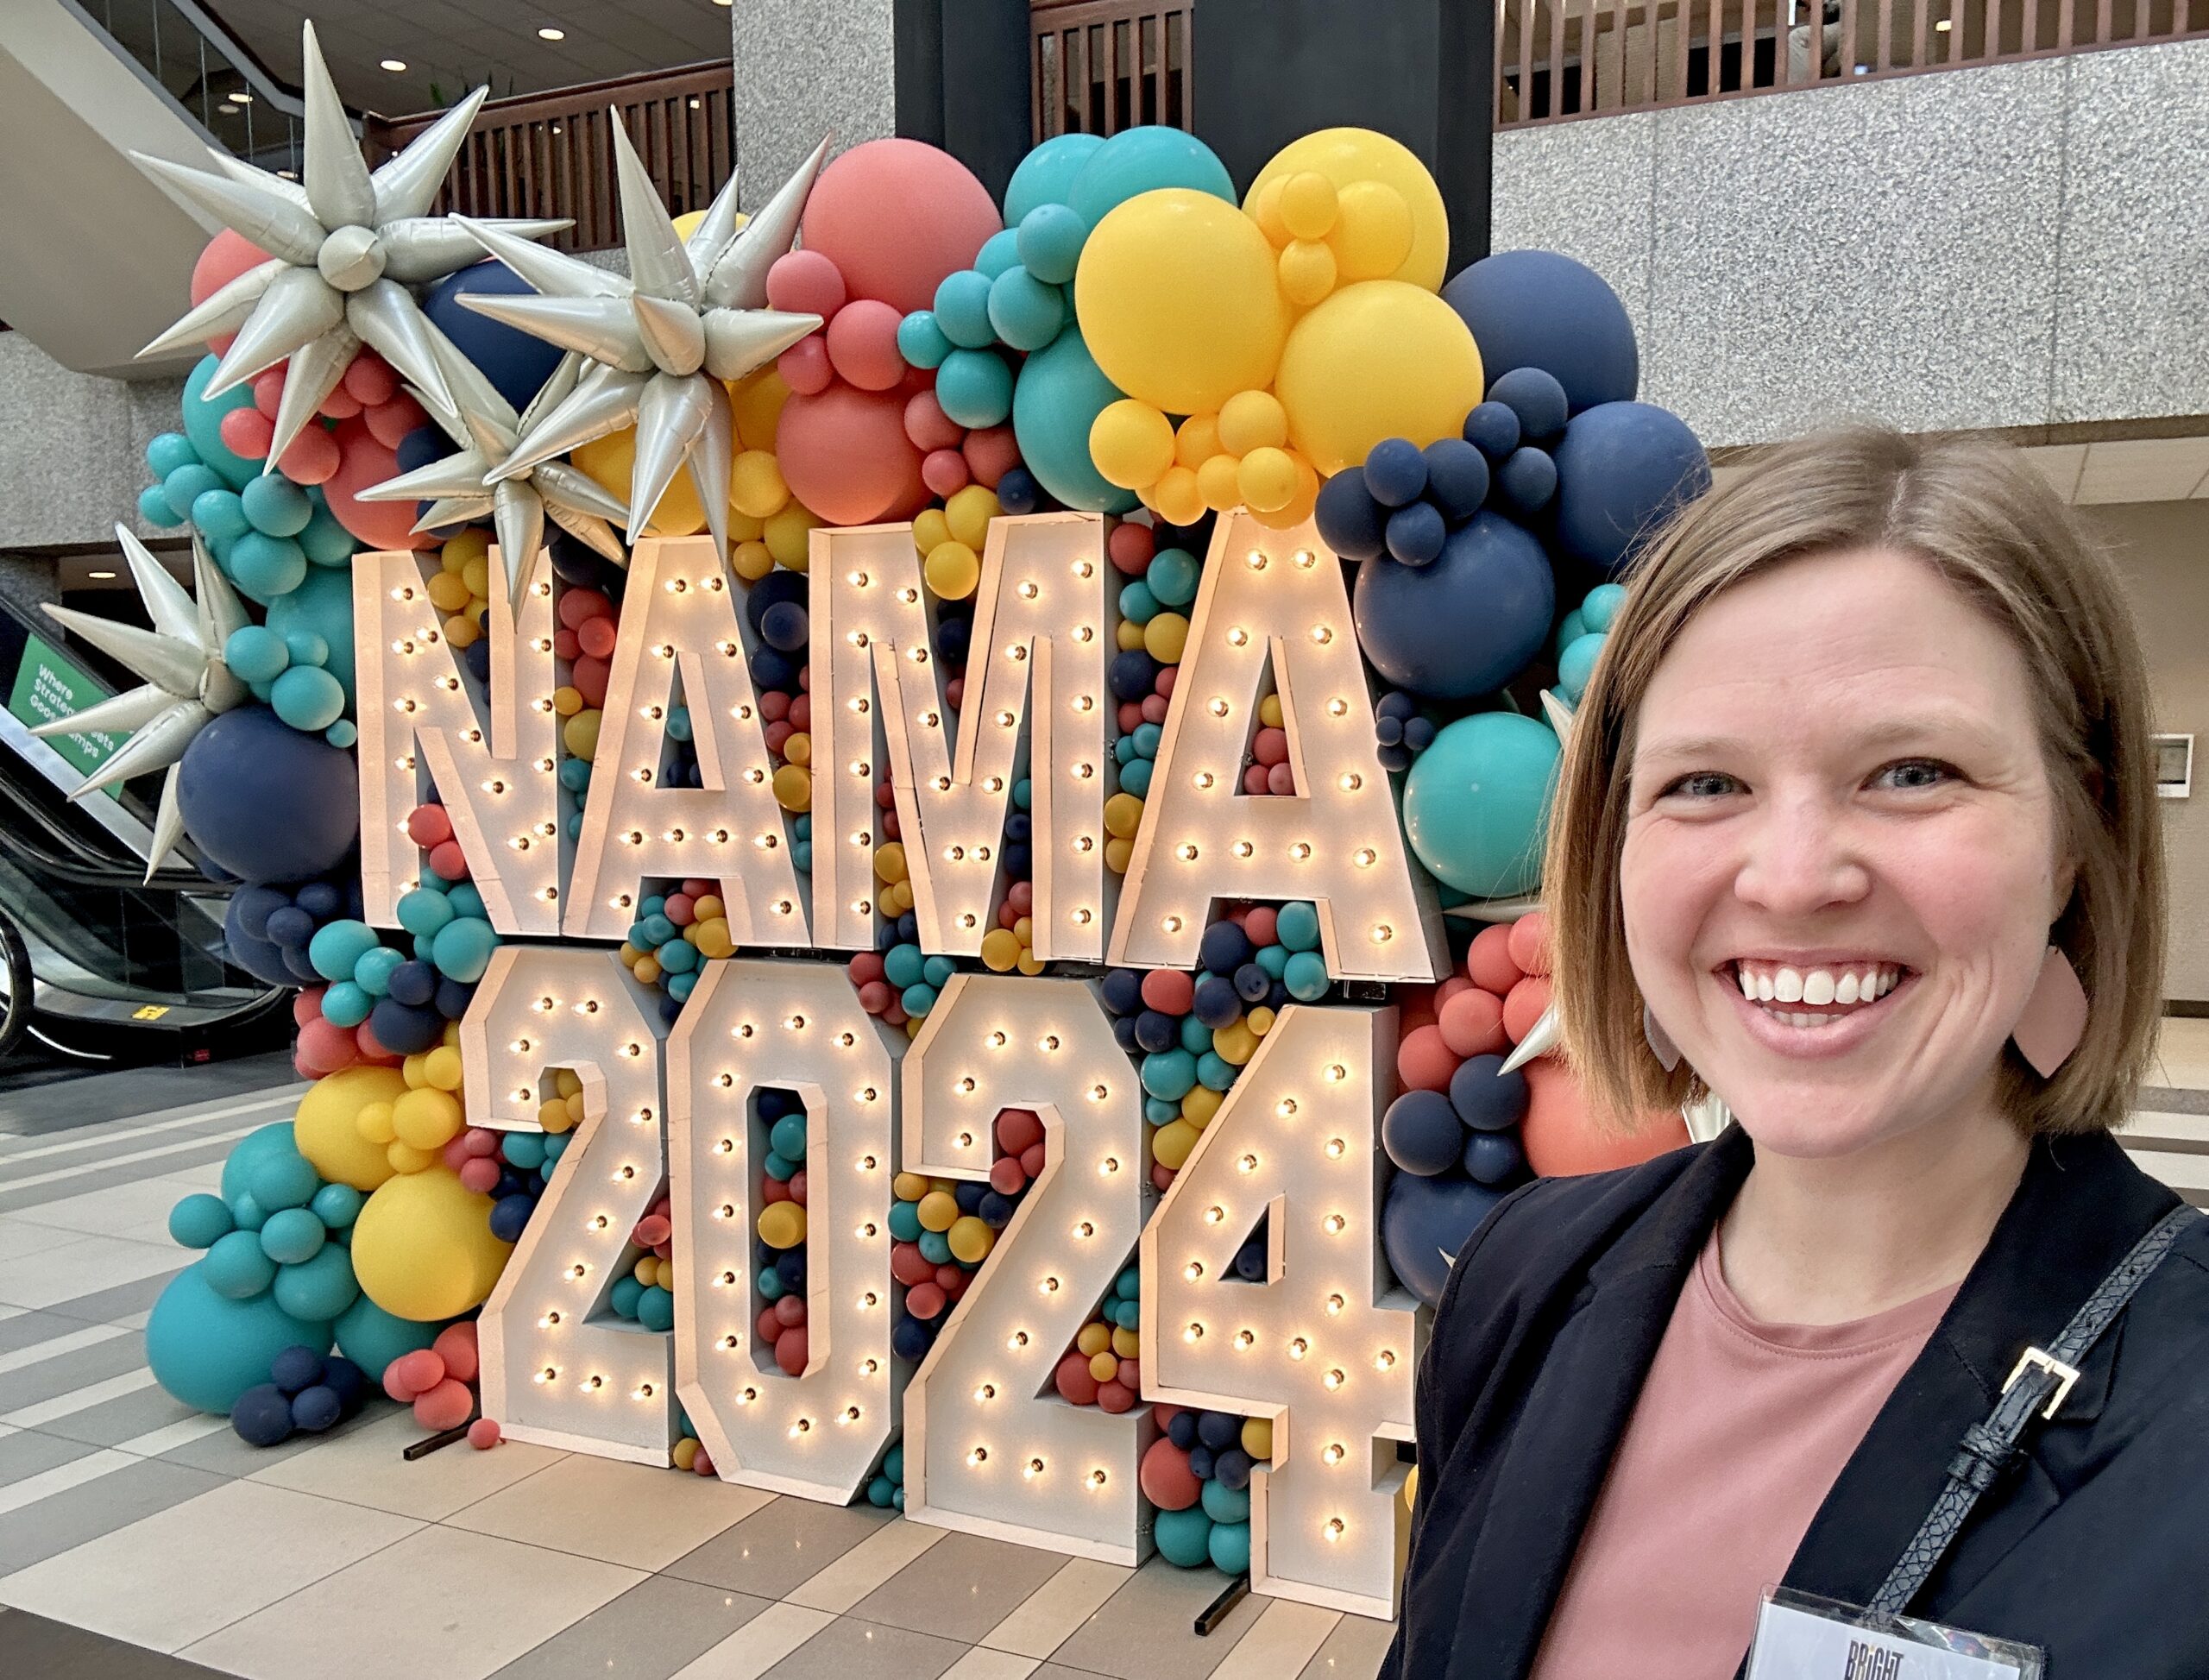 Sara snaps a selfie with decorations at a business conference